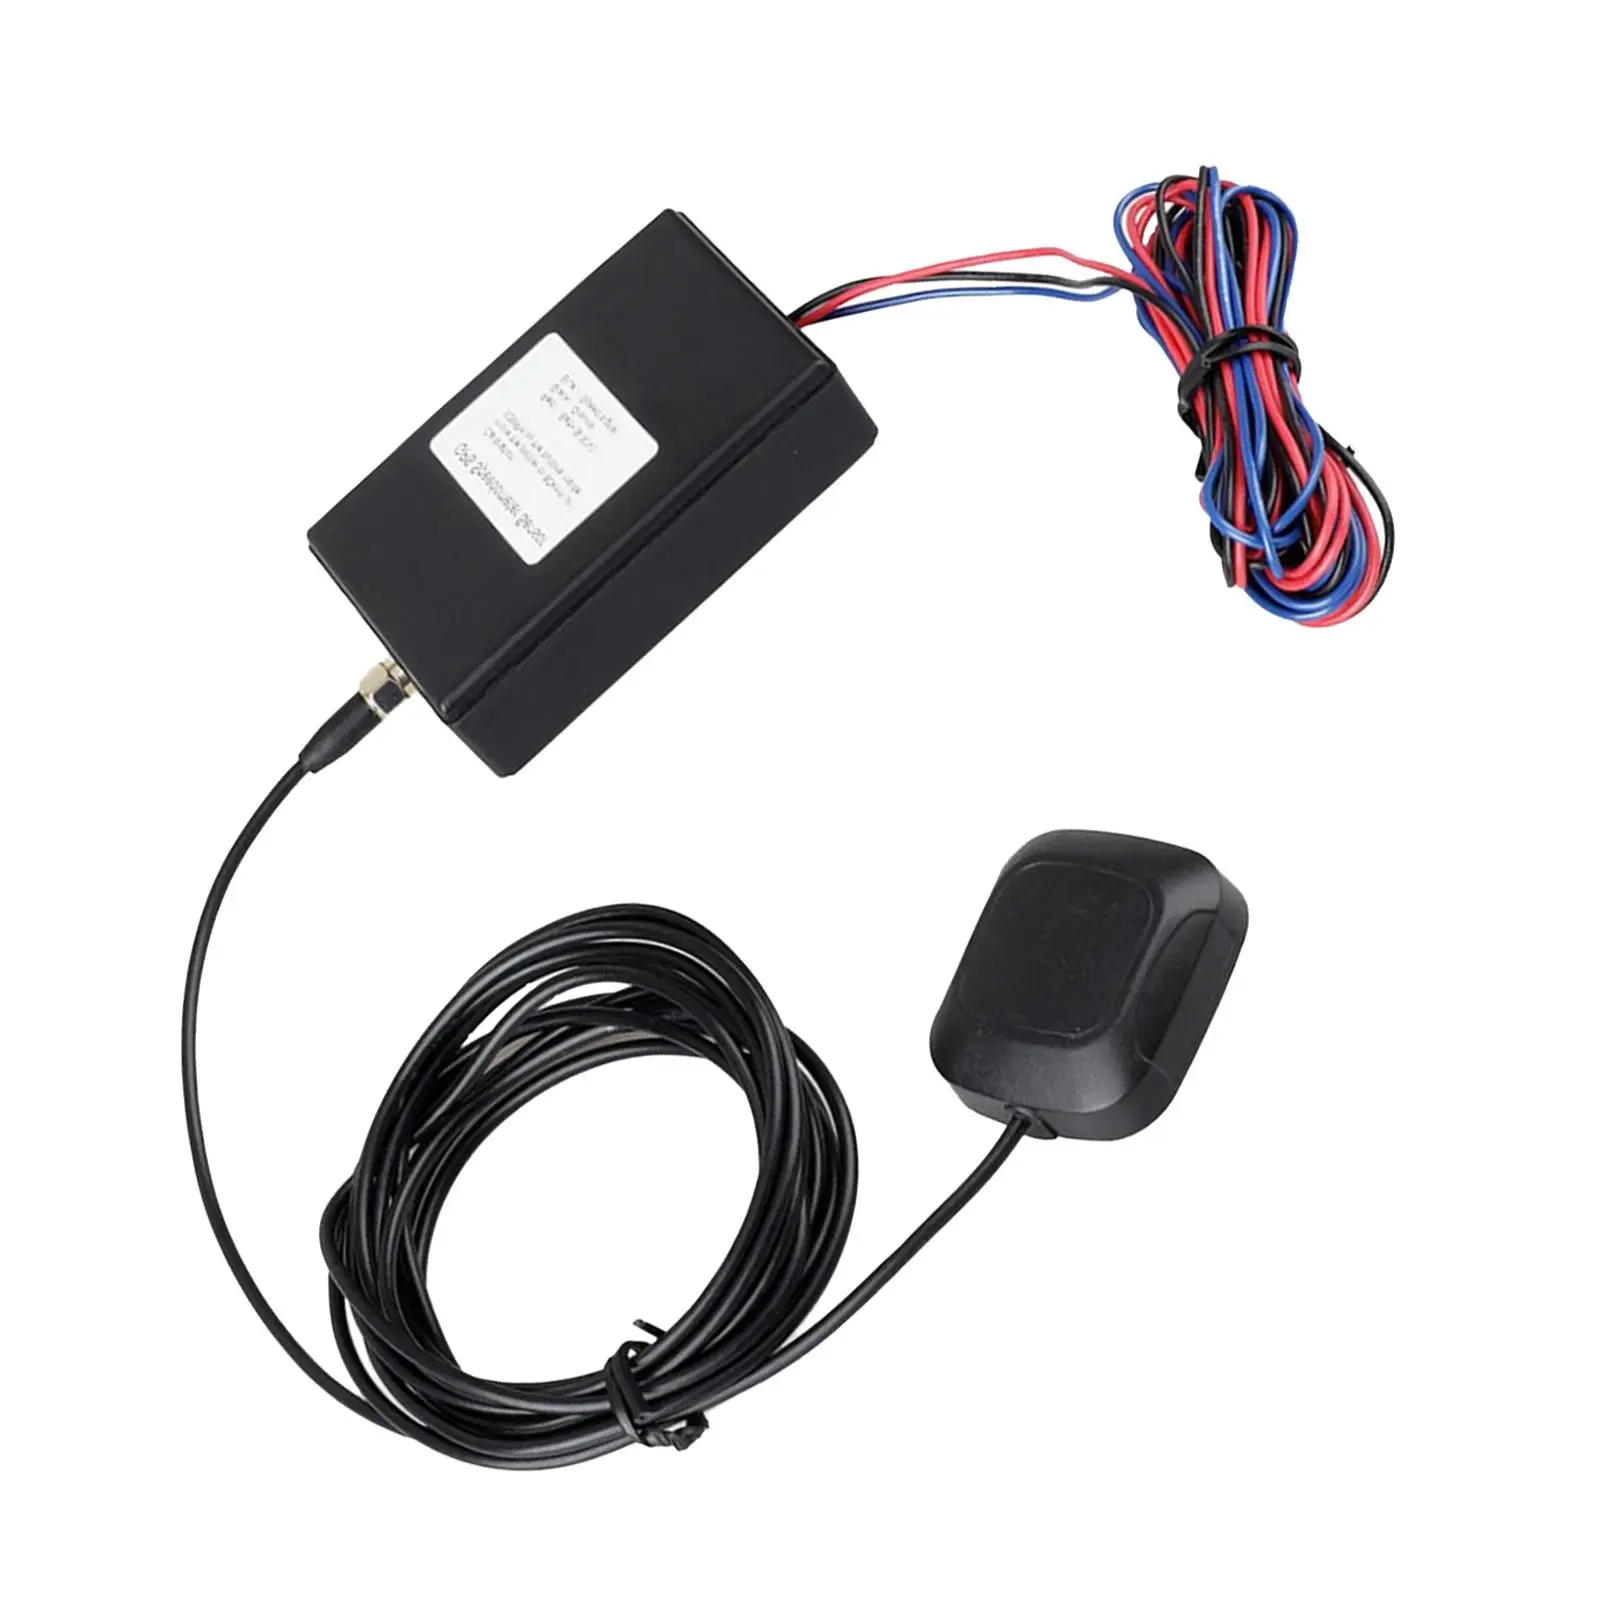 GPS Speedometer Sensor Speed Sender For Car Motorcycle Truck Replacement Parts Accessories Easy to Install